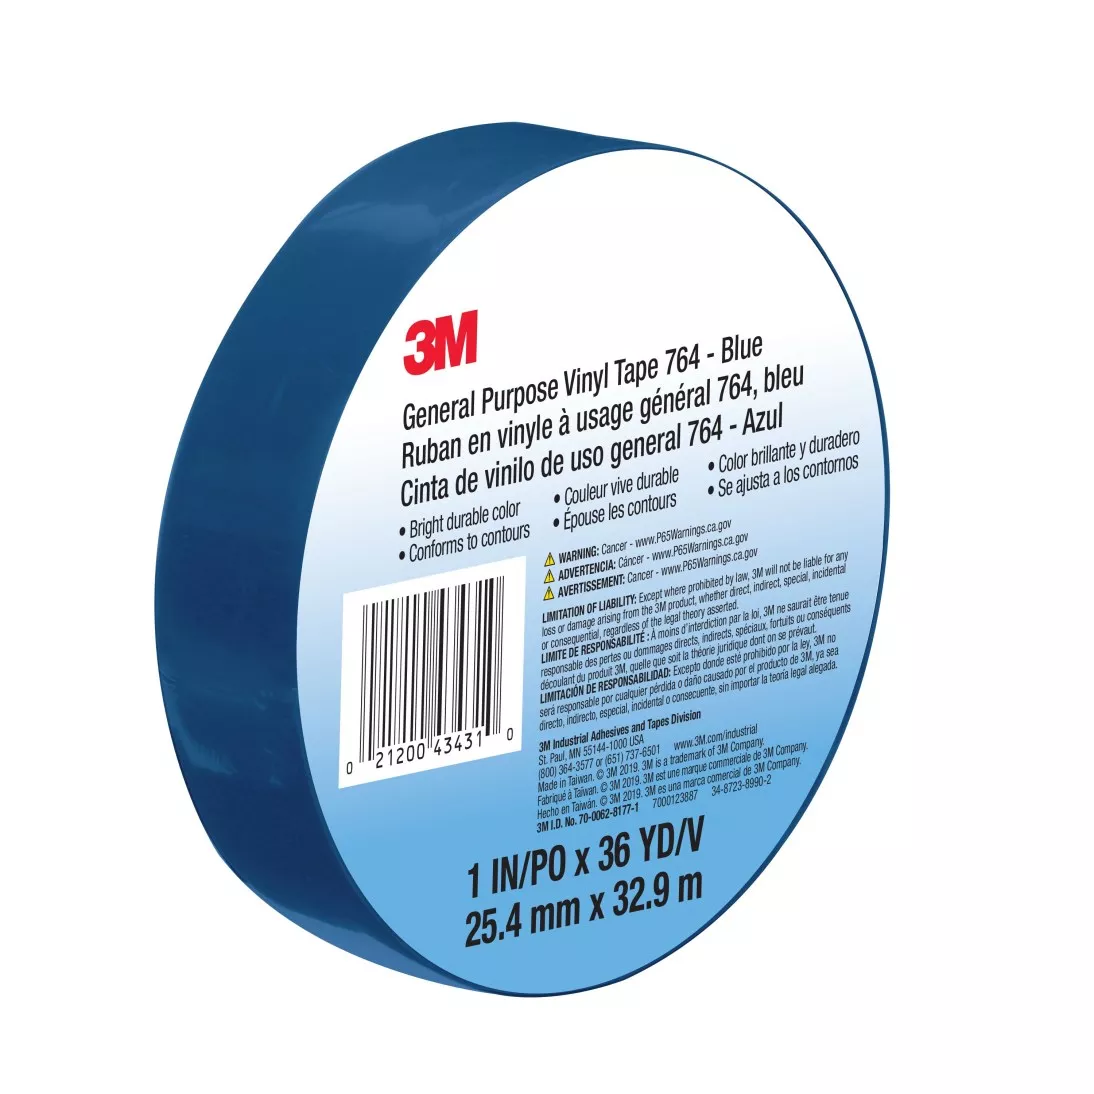 3M™ General Purpose Vinyl Tape 764, Blue, 1 in x 36 yd, 5 mil, 36 Roll/Case, Individually Wrapped Conveniently Packaged